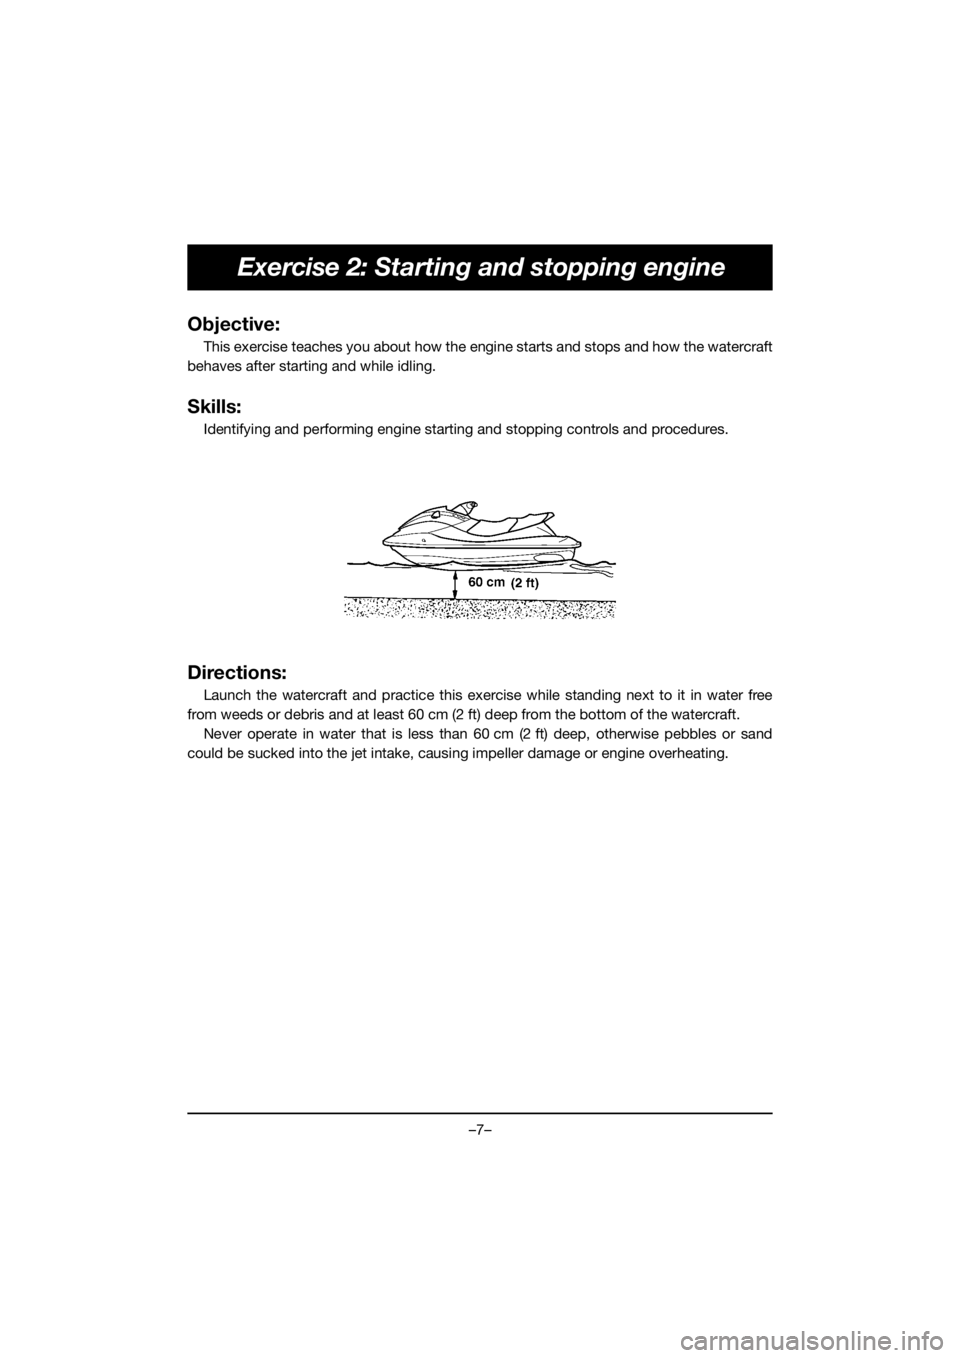 YAMAHA EX SPORT 2020 User Guide –7–
Exercise 2: Starting and stopping engine
Objective:
This exercise teaches you about how the engine starts and stops and how the watercraft
behaves after starting and while idling.
Skills:
Iden